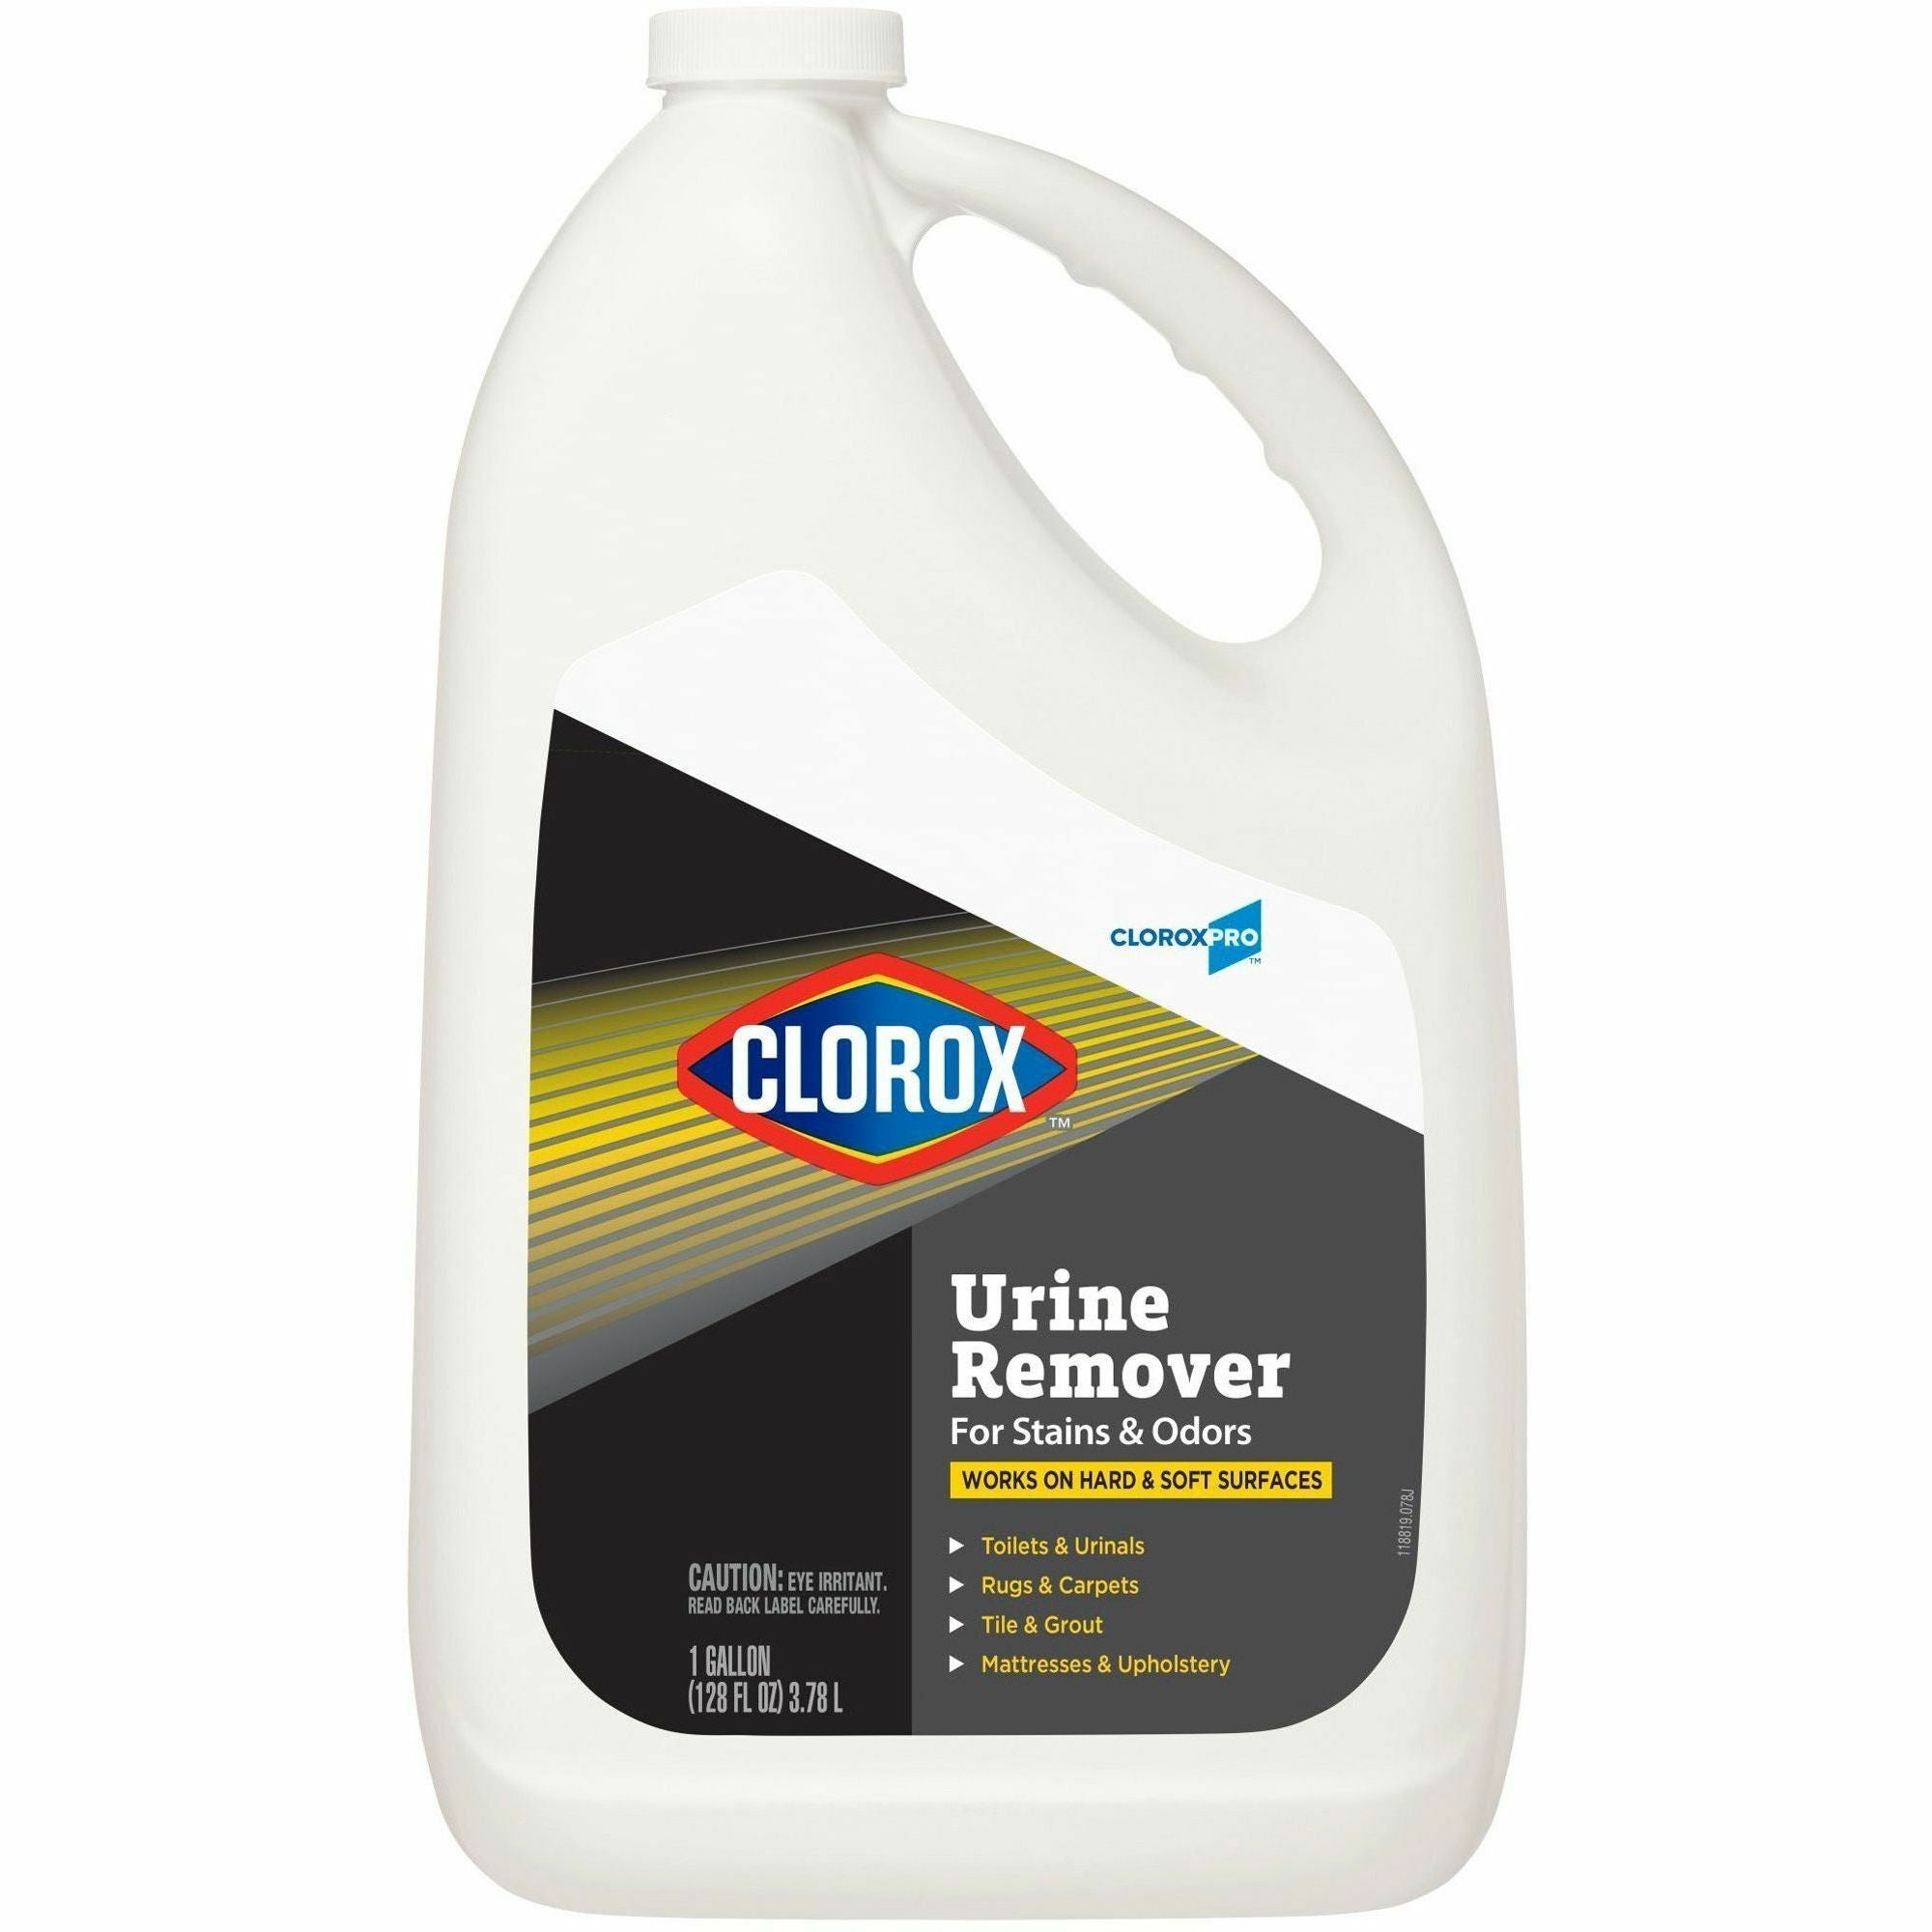 CloroxPro Urine Remover for Stains and Odors Refill - 128 fl oz (4 quart) - 120 / Pallet - Bleach-free - Clear - 2